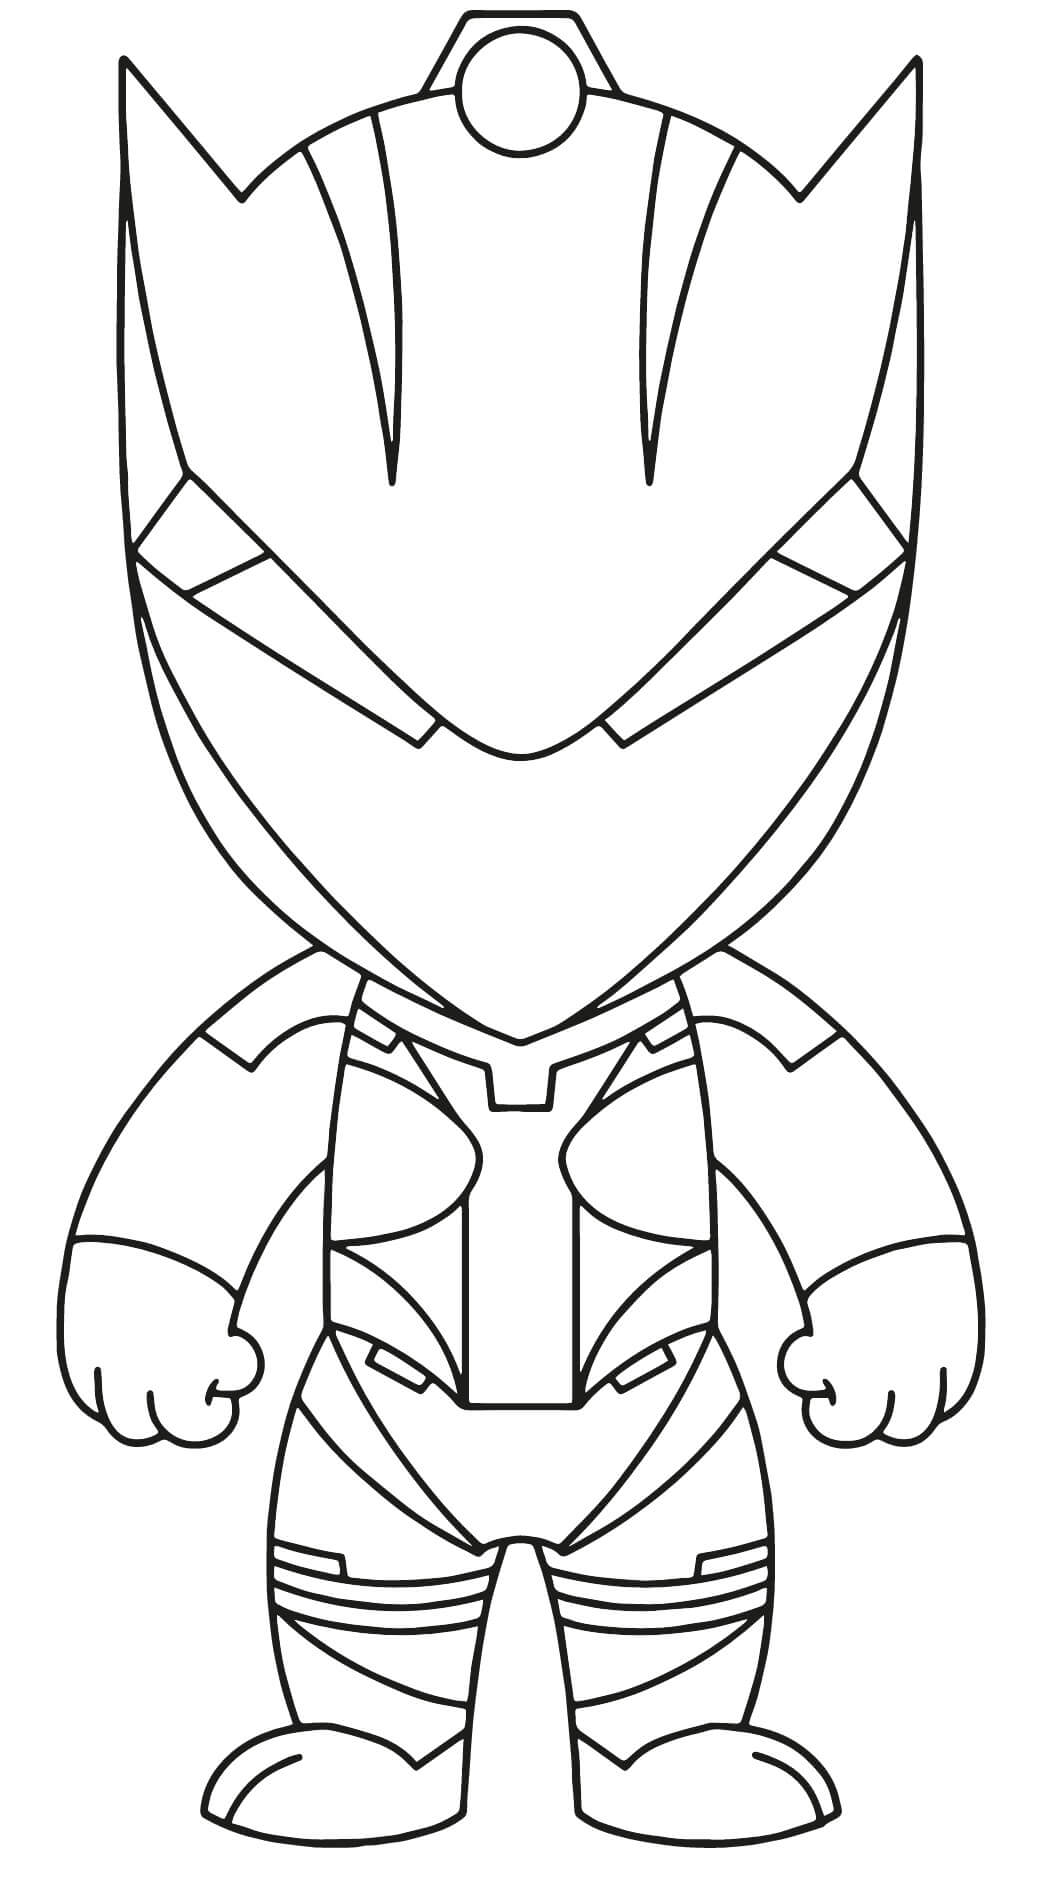 Omega Coloring Page